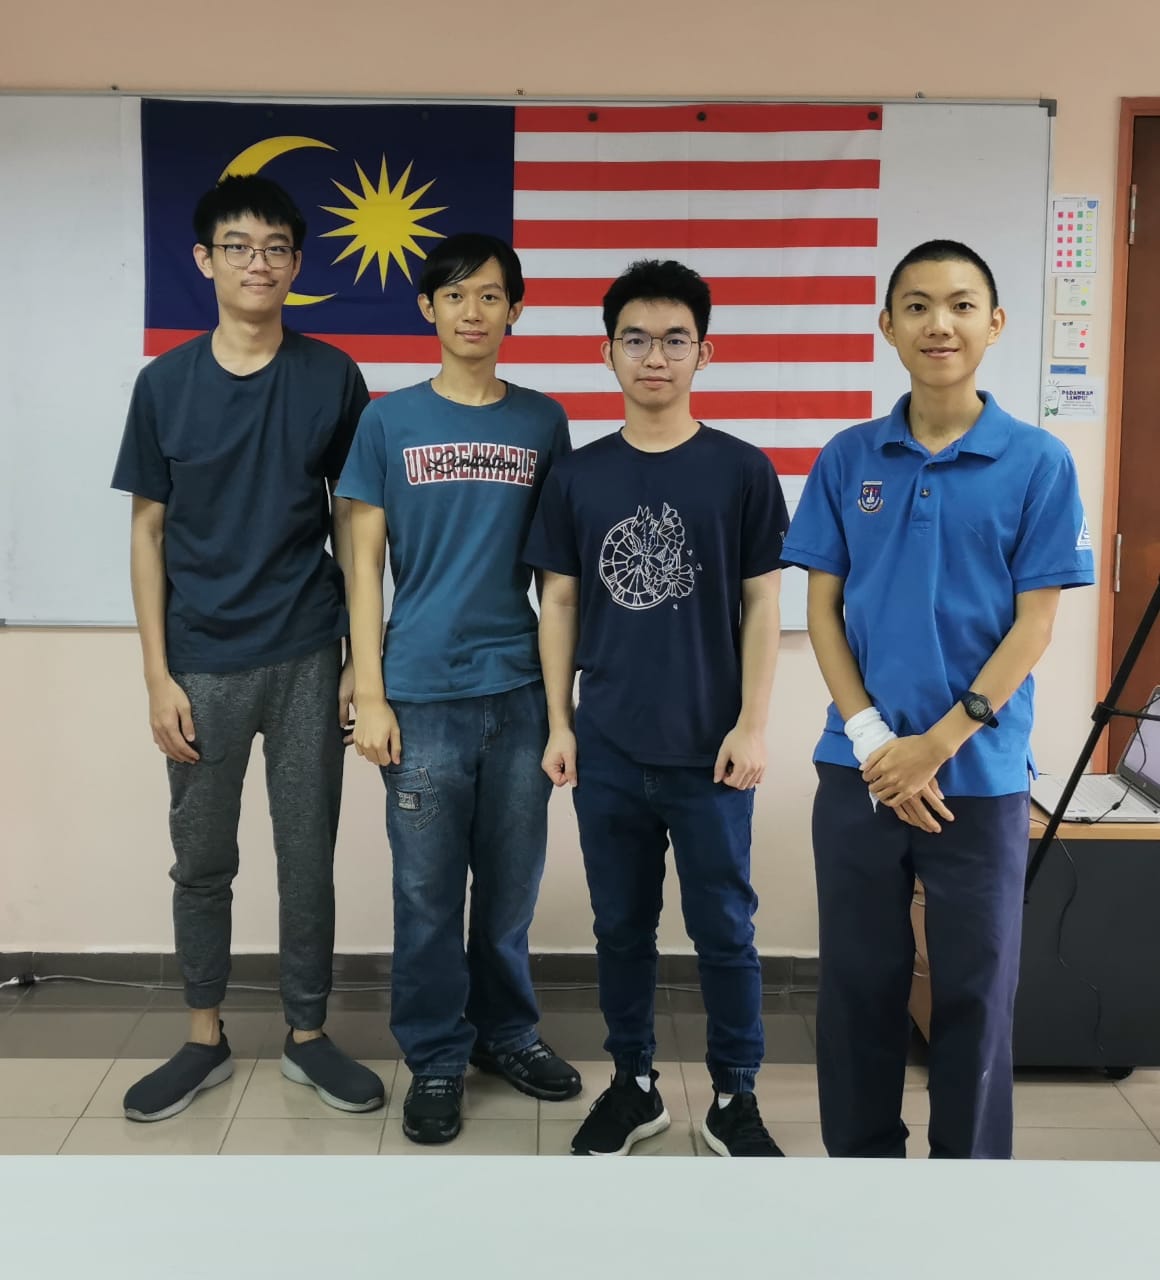 A group of men posing for a photo in front of a flag

Description automatically generated